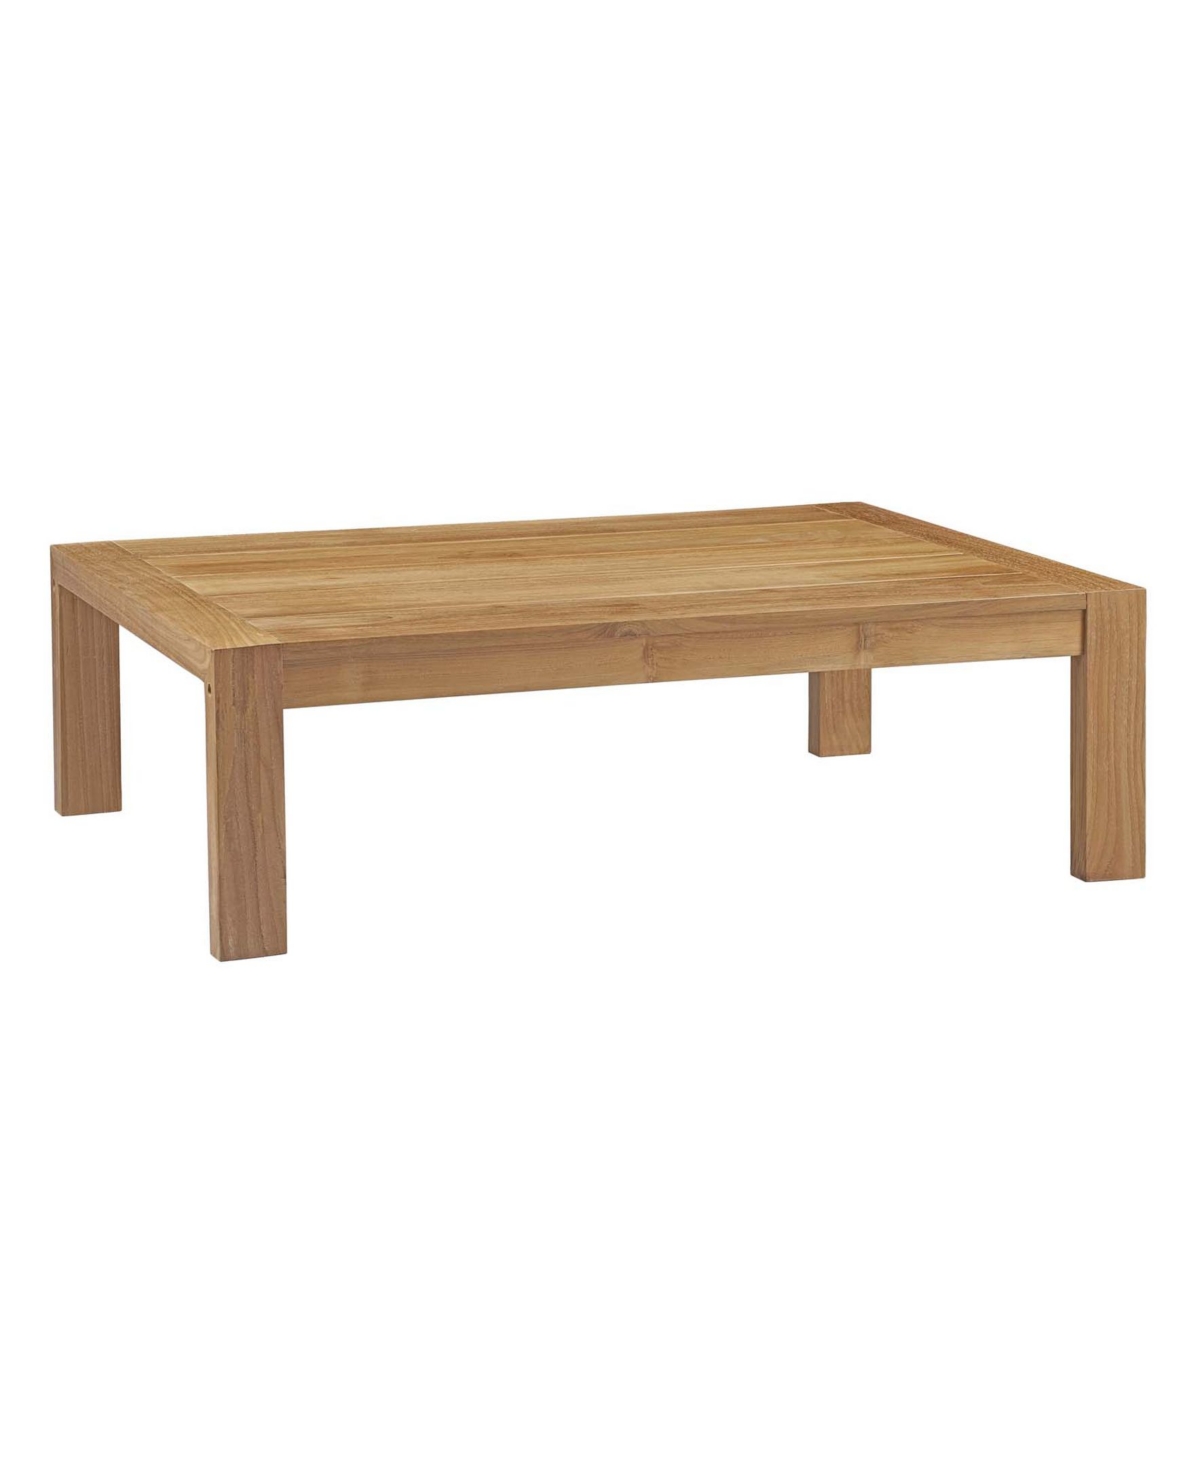 Modway Upland Outdoor Patio Wood Coffee Table In Brown